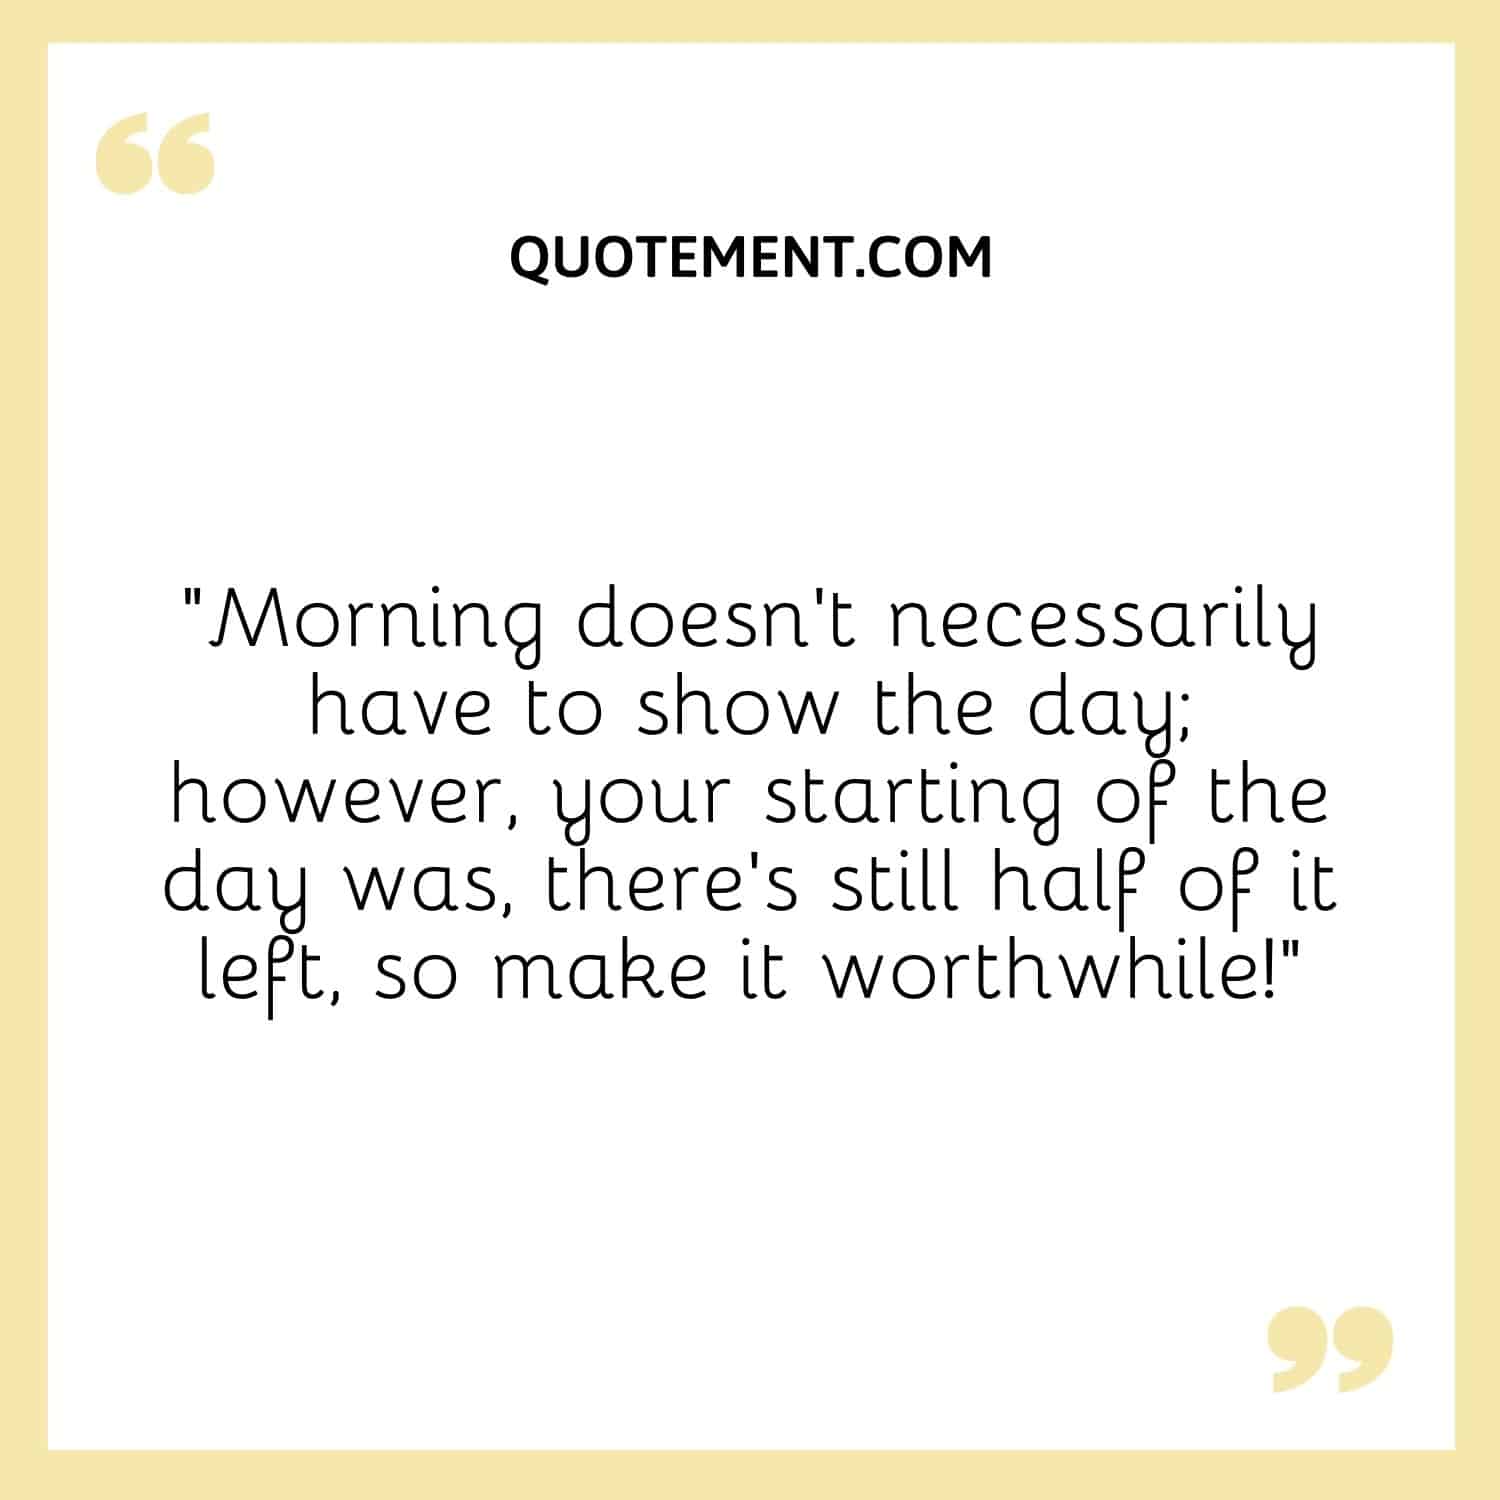 Morning doesn't necessarily have to show the day; however, your starting of the day was, there's still half of it left, so make it worthwhile!